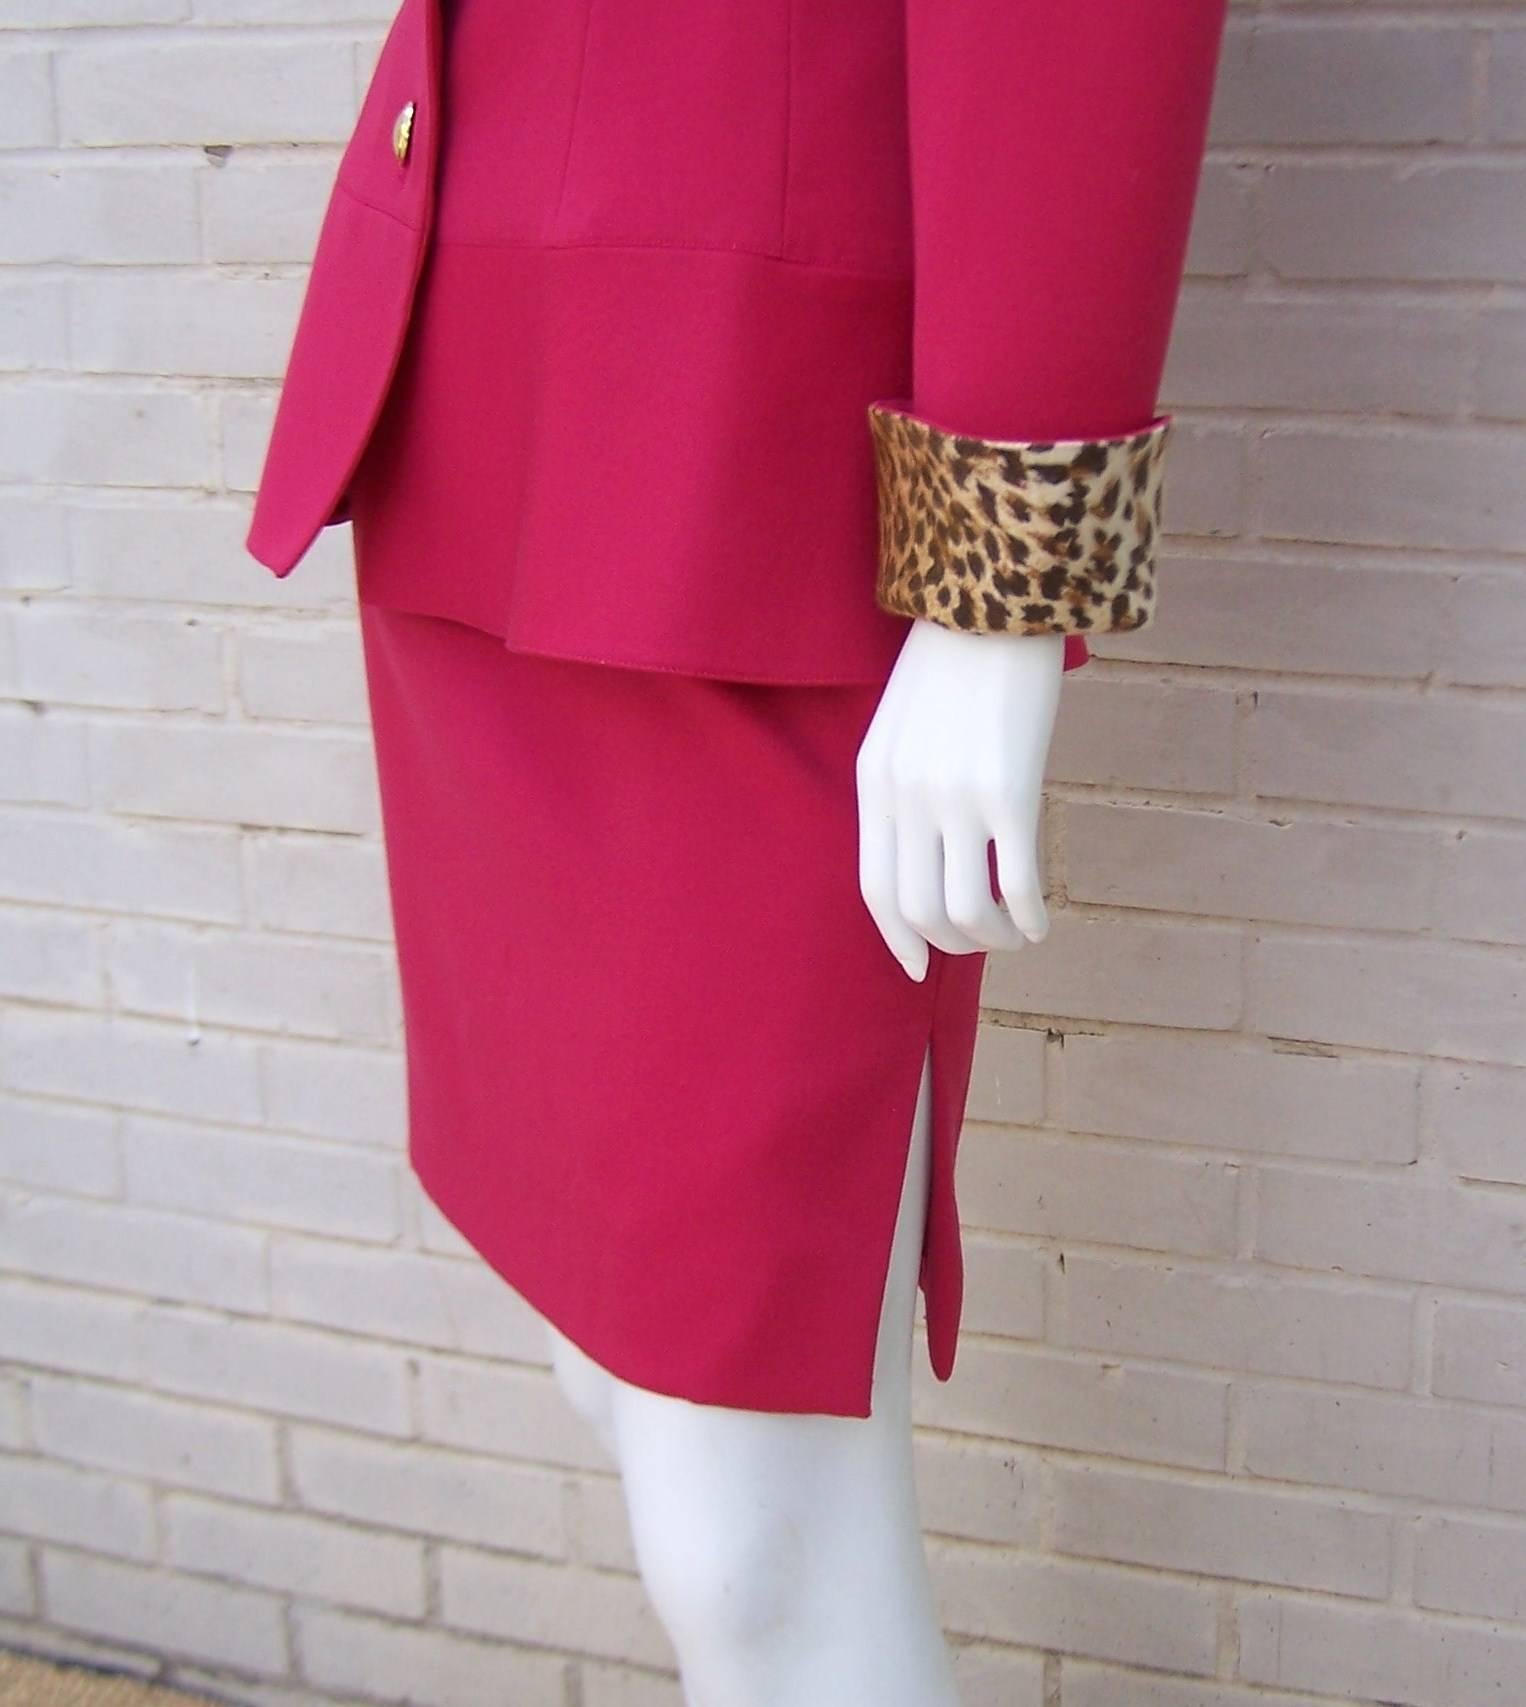 C.1990 Raspberry Red Valentino Dress Suit With Cheetah Print Vents & Cuffs 4